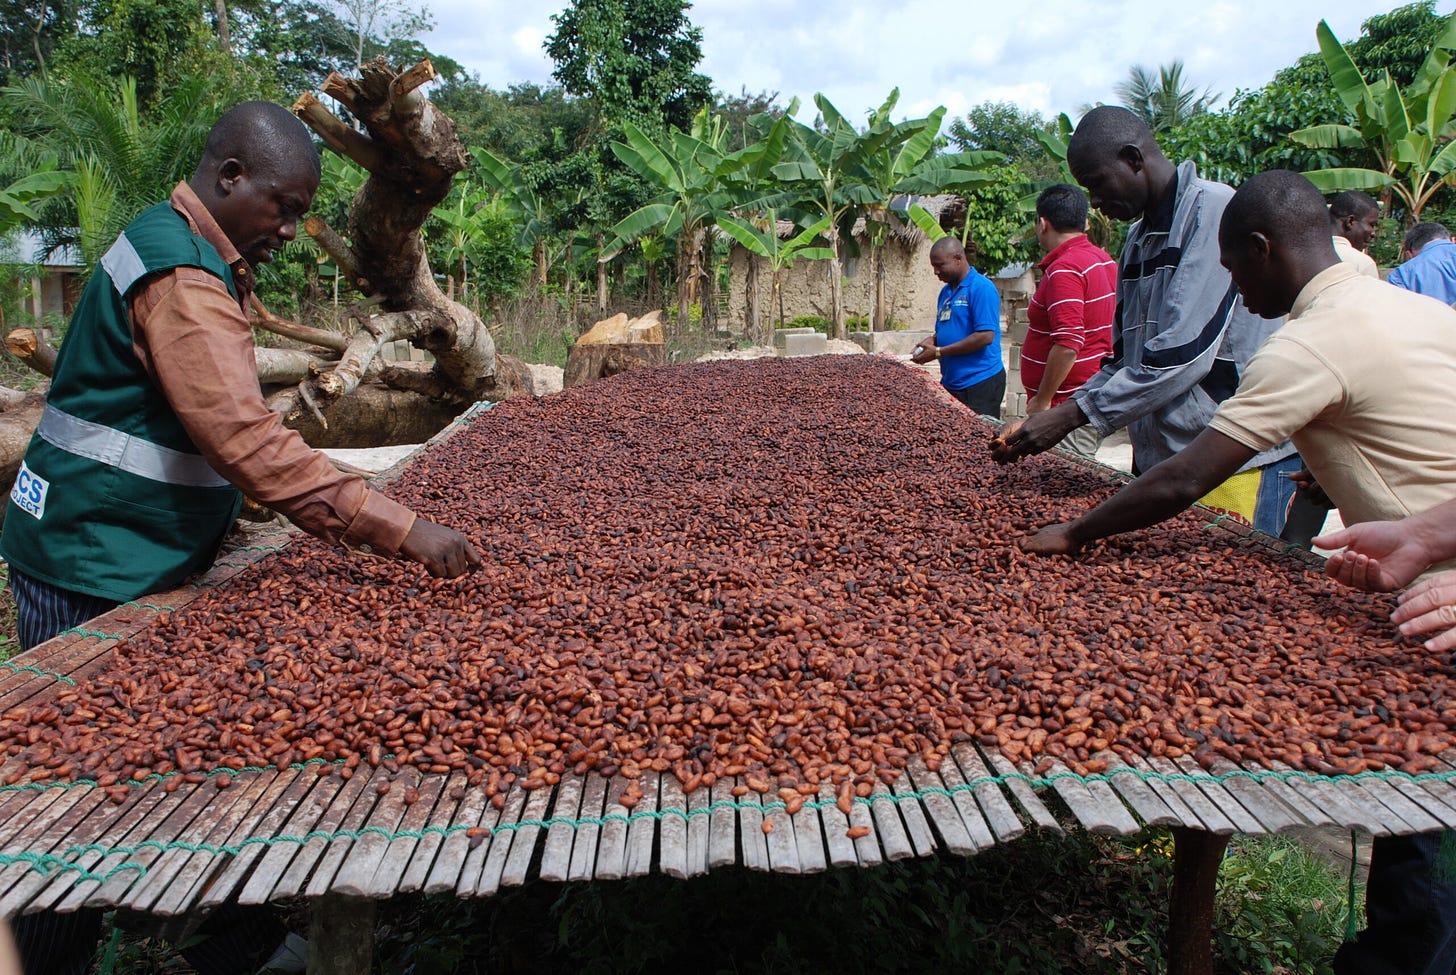 Heavy rains in West Africa help boost cocoa crop production - CGTN Africa